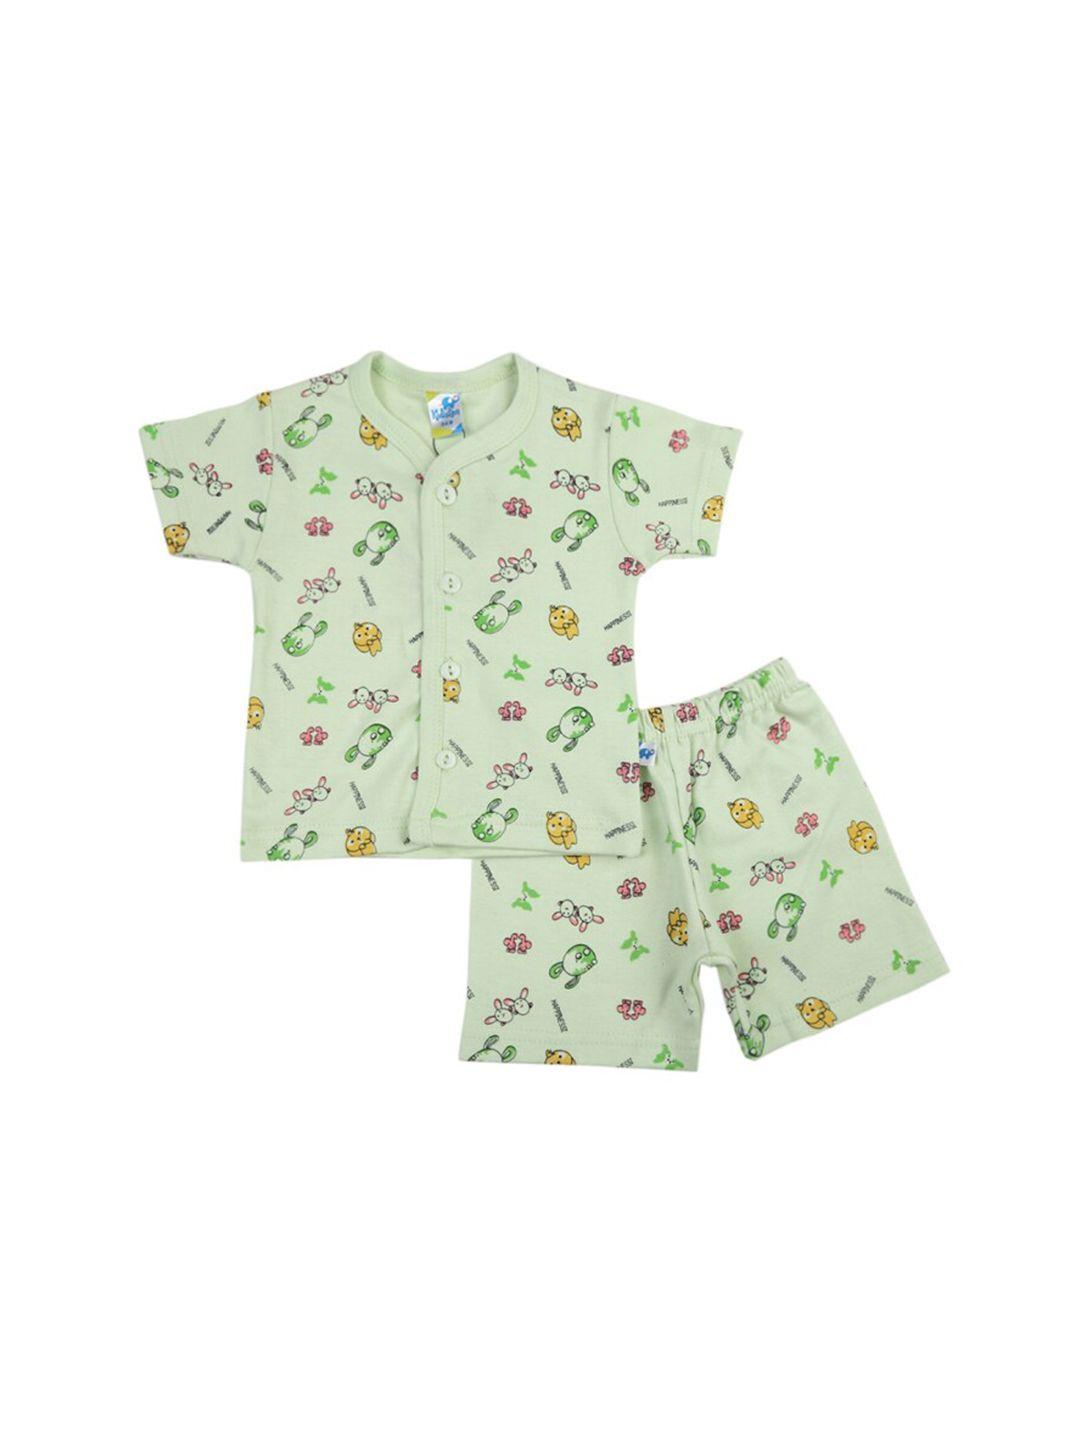 v-mart infant conversational printed pure cotton t-shirt with shorts